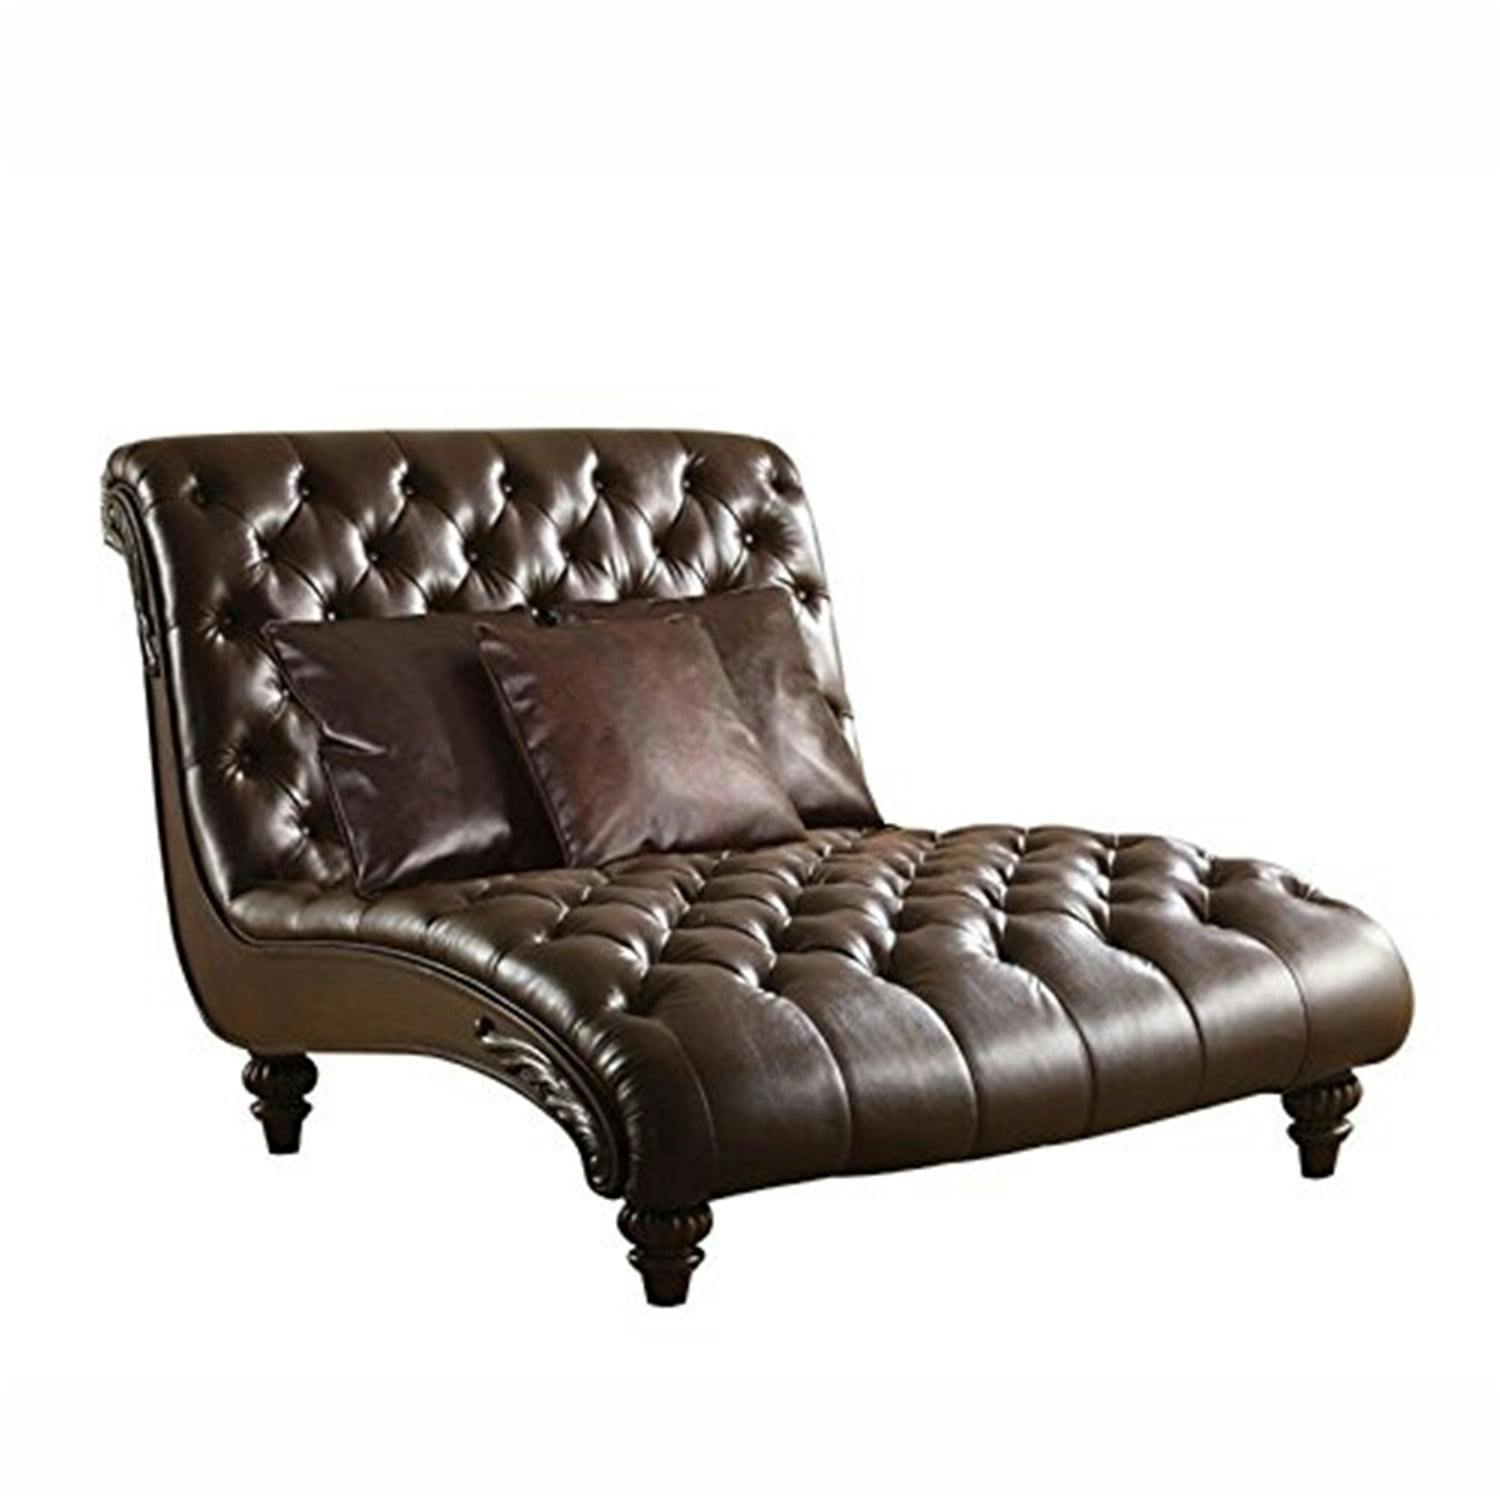 Anondale Classic Elegance Button-Tufted Chaise in 2-Tone Brown